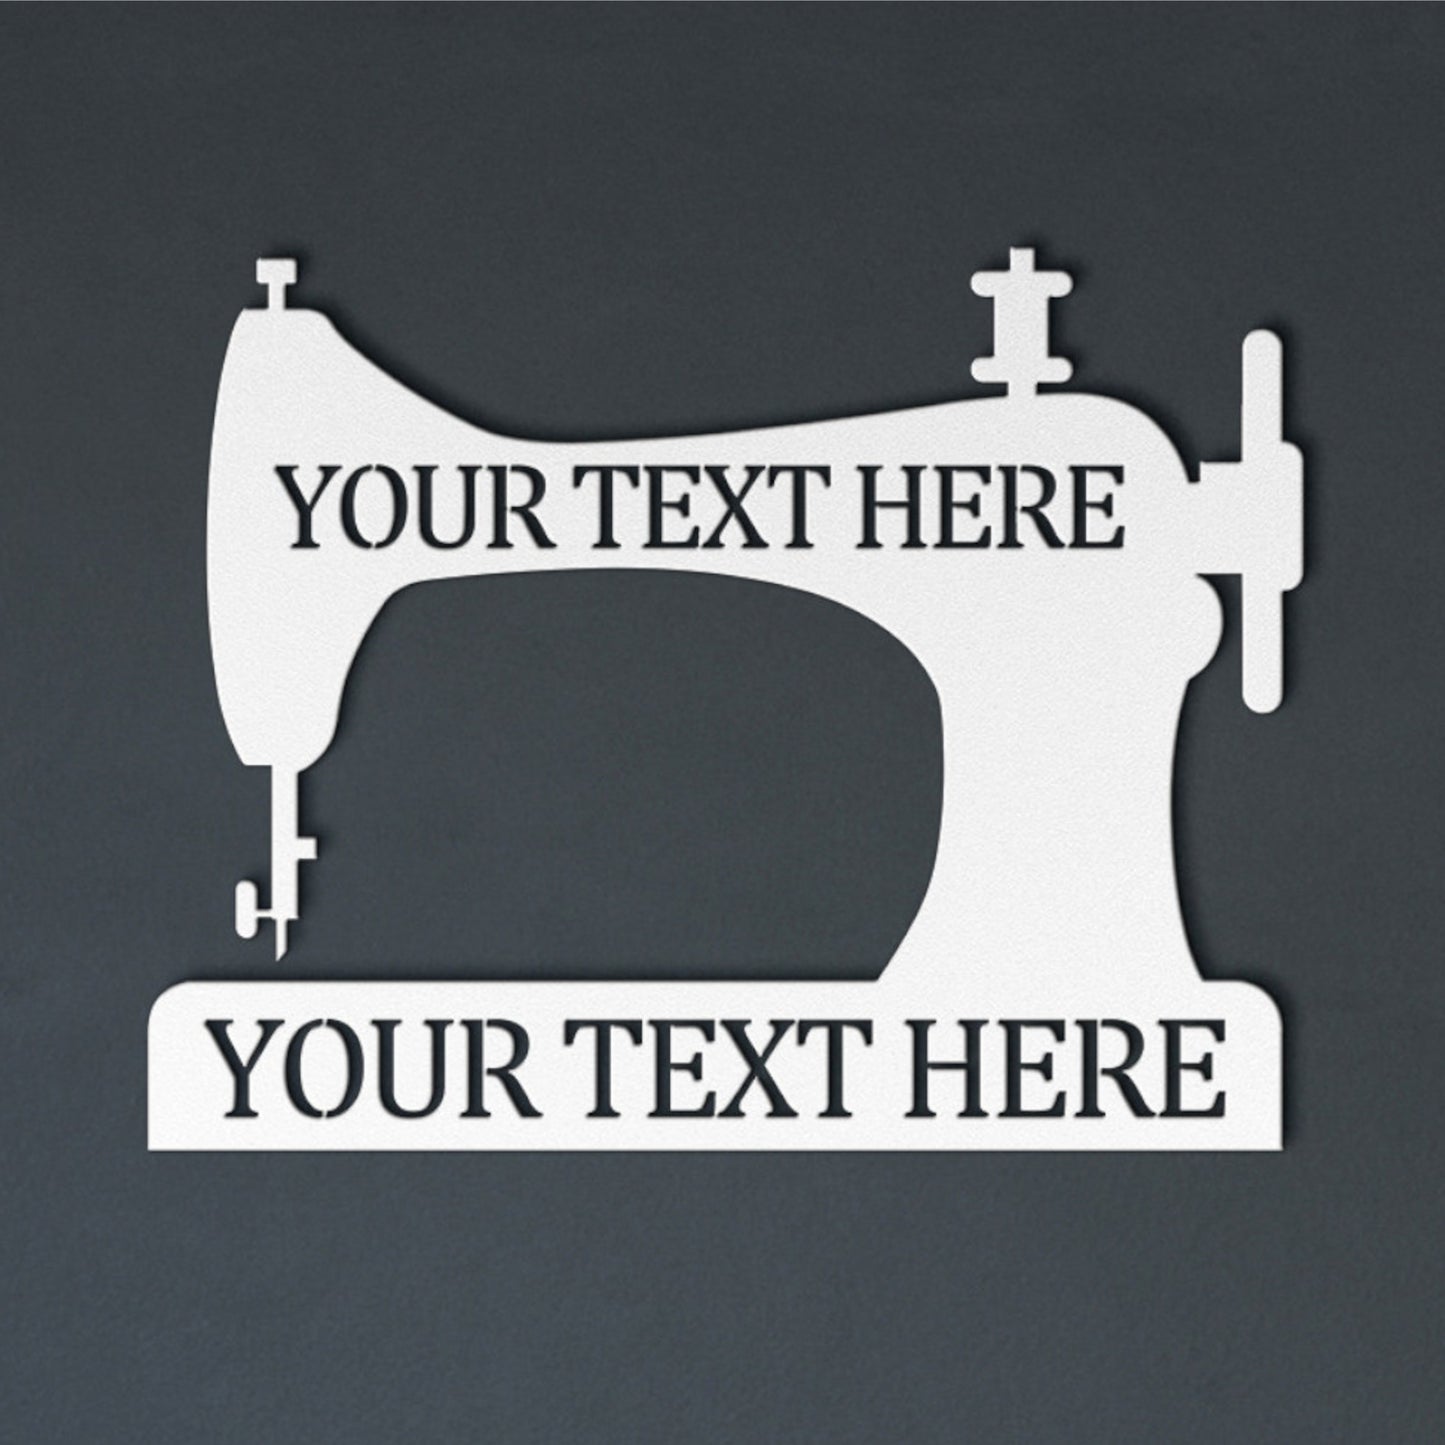 Personalized Retro Sewing Machine With Your Custom Text. Design Studio Wall Portrait